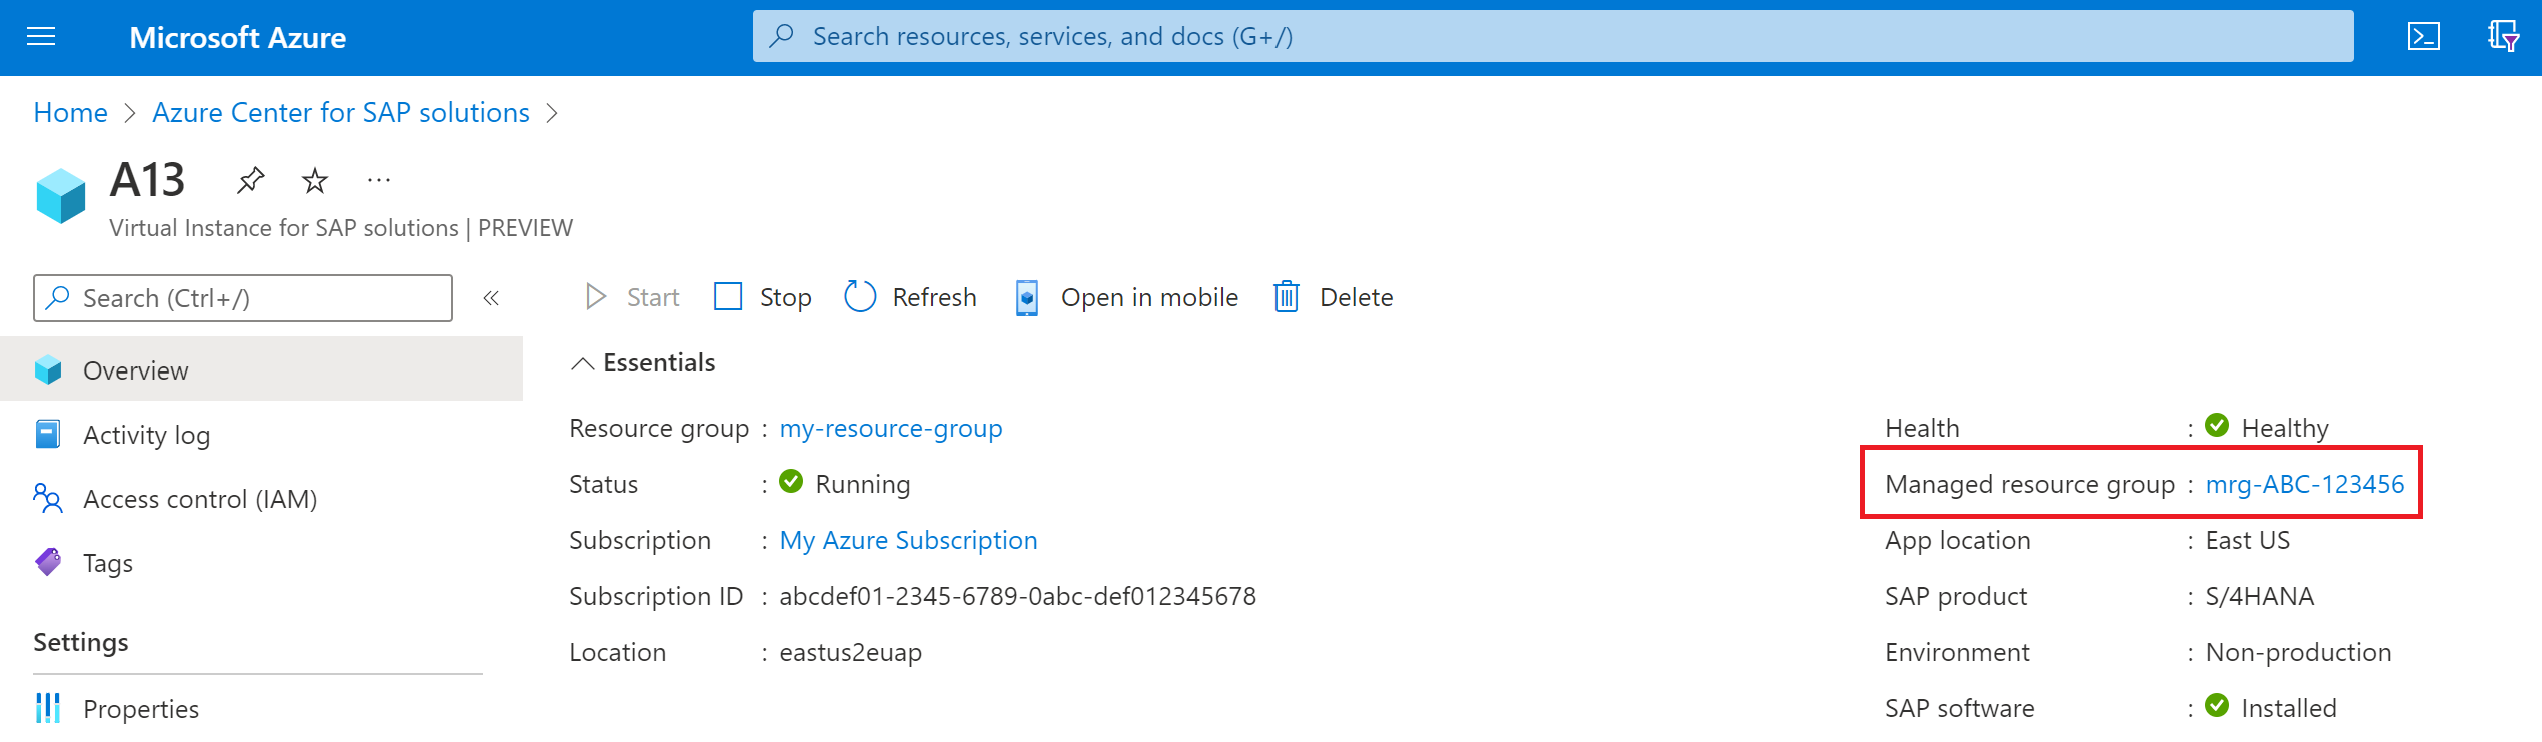 Screenshot of V I S resource in the Azure portal, showing selection of managed resource group on the overview page.